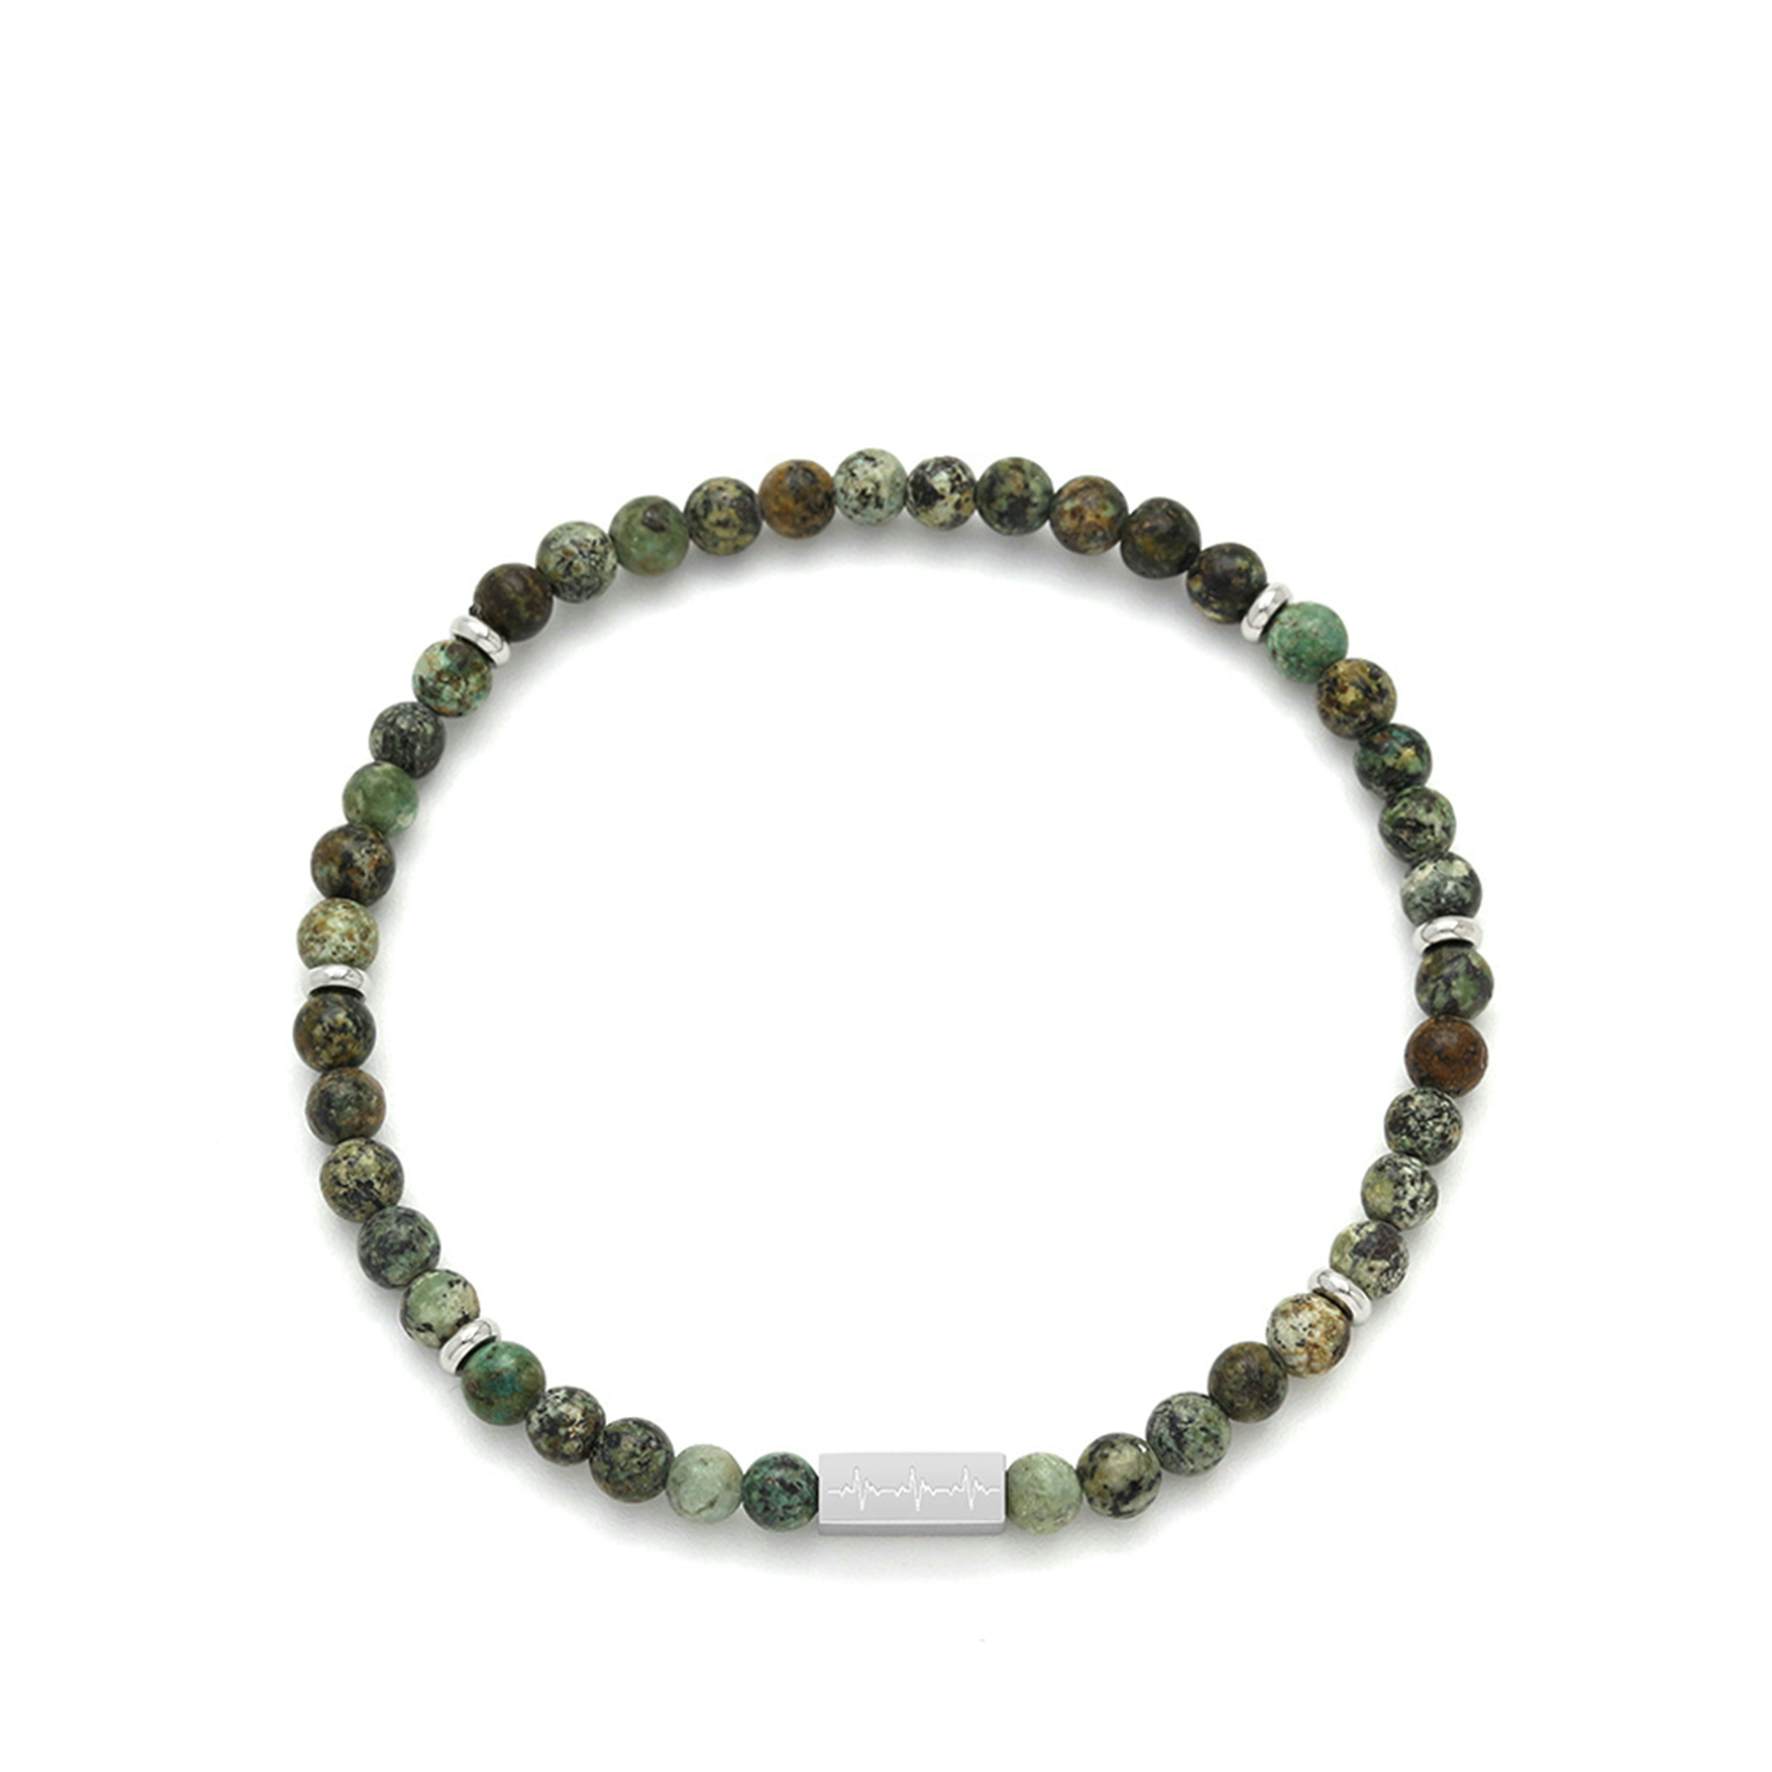 Evolution African Turquoise Bracelet from SAMIE in Stainless steel